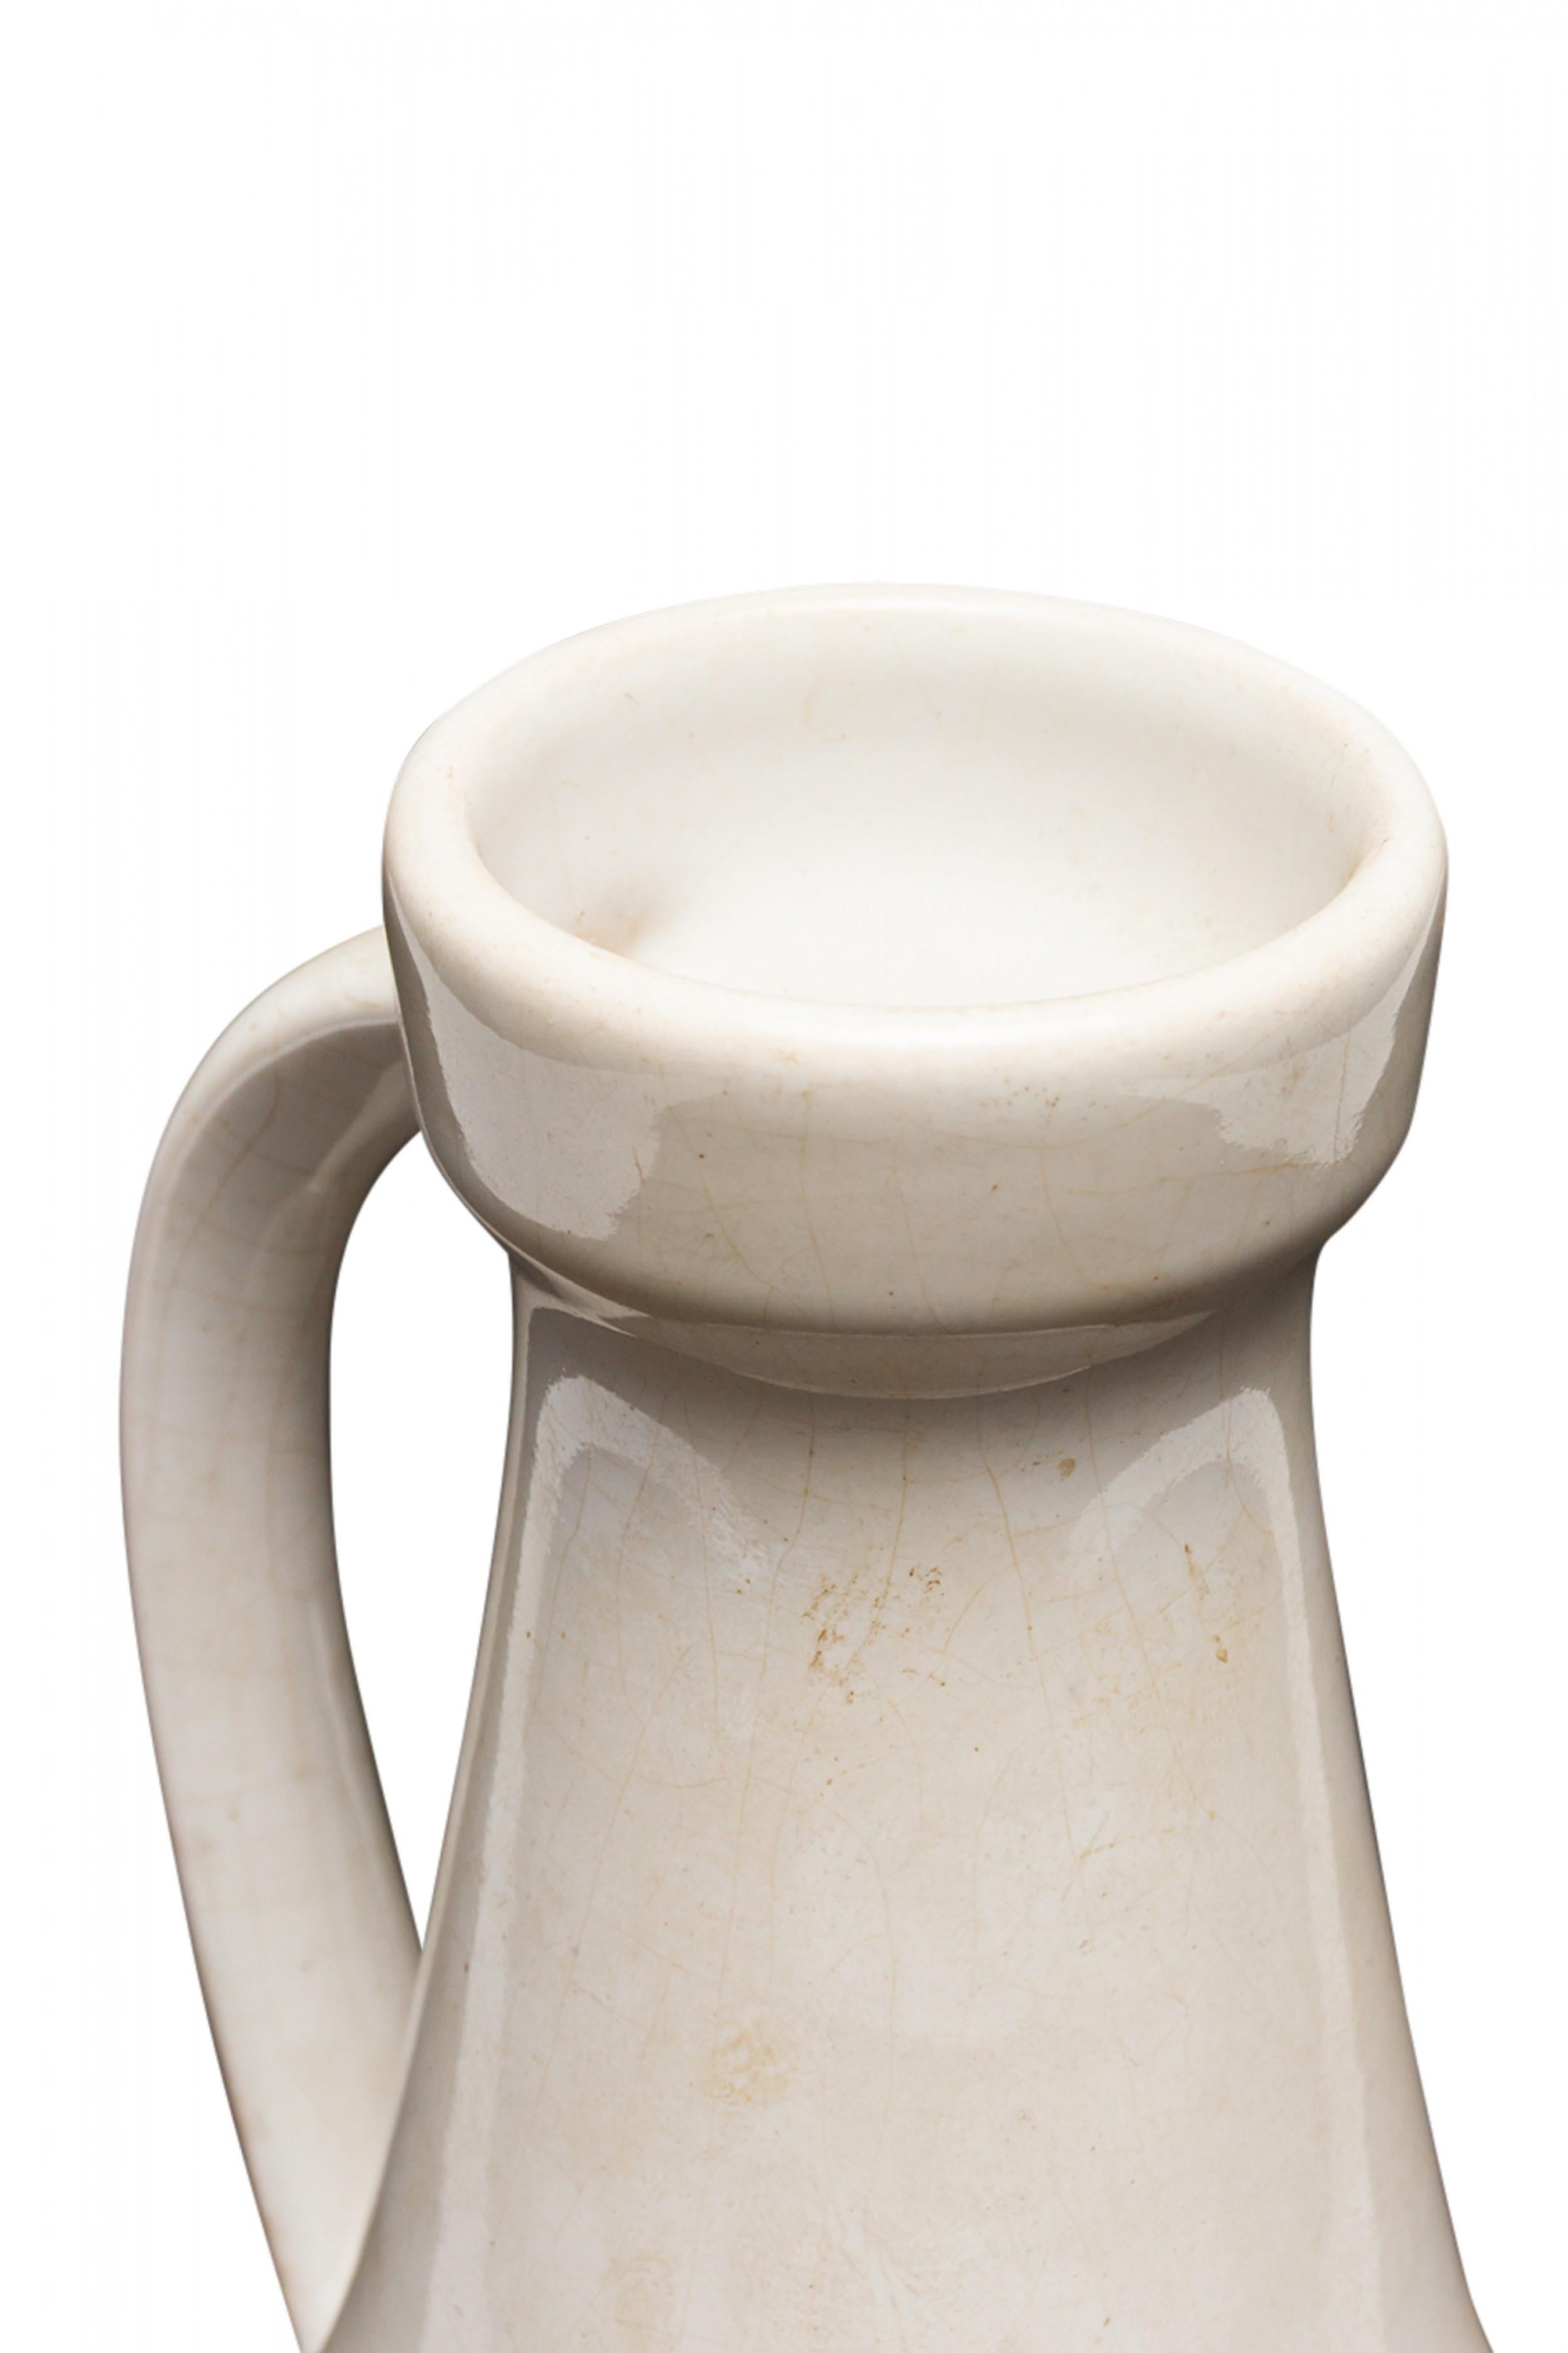 West German Mid-Century ceramic handled vase with a dimpled band around the bottom and a tapered neck and curved handle with a white glazed finish. (mark on bottom, W. GERMANY 862/20).